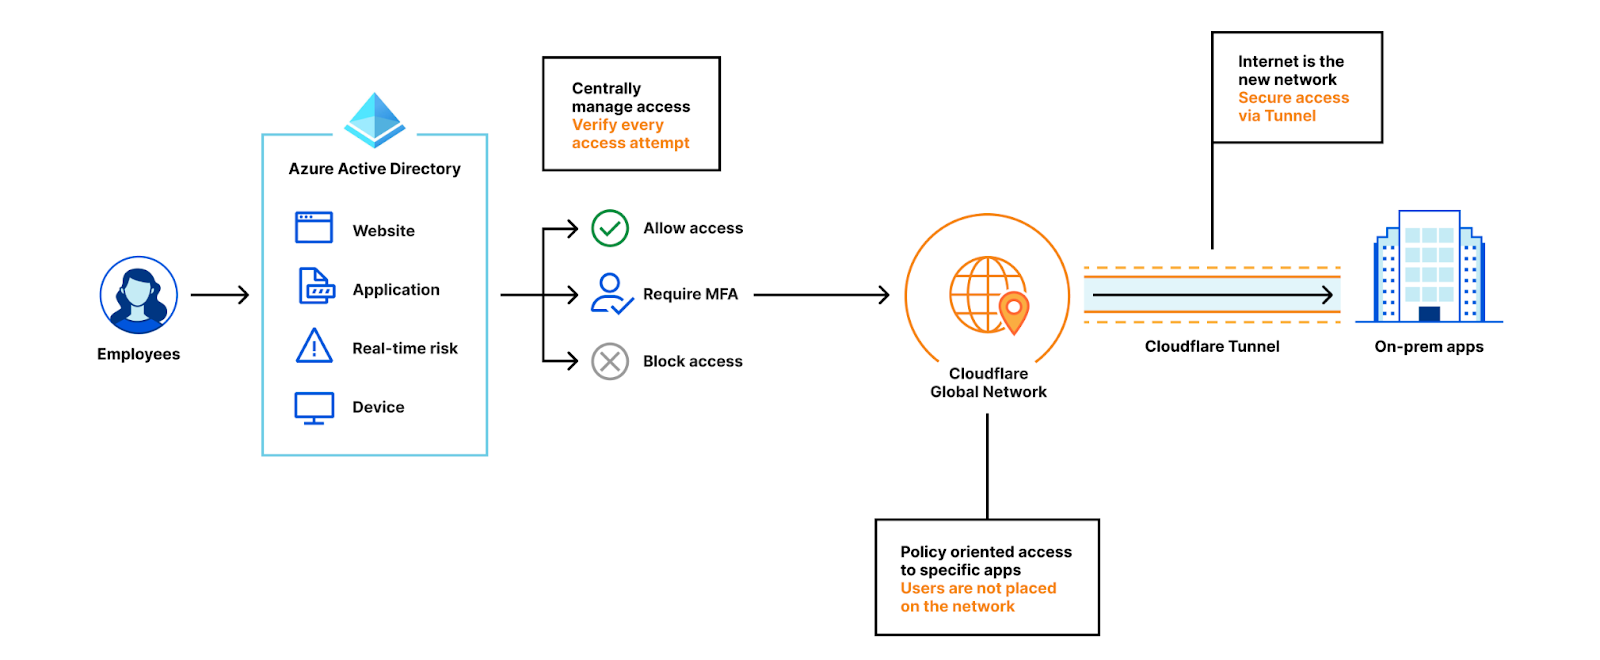 Cloudflare ONE Azure AD Integration for Zero Trust